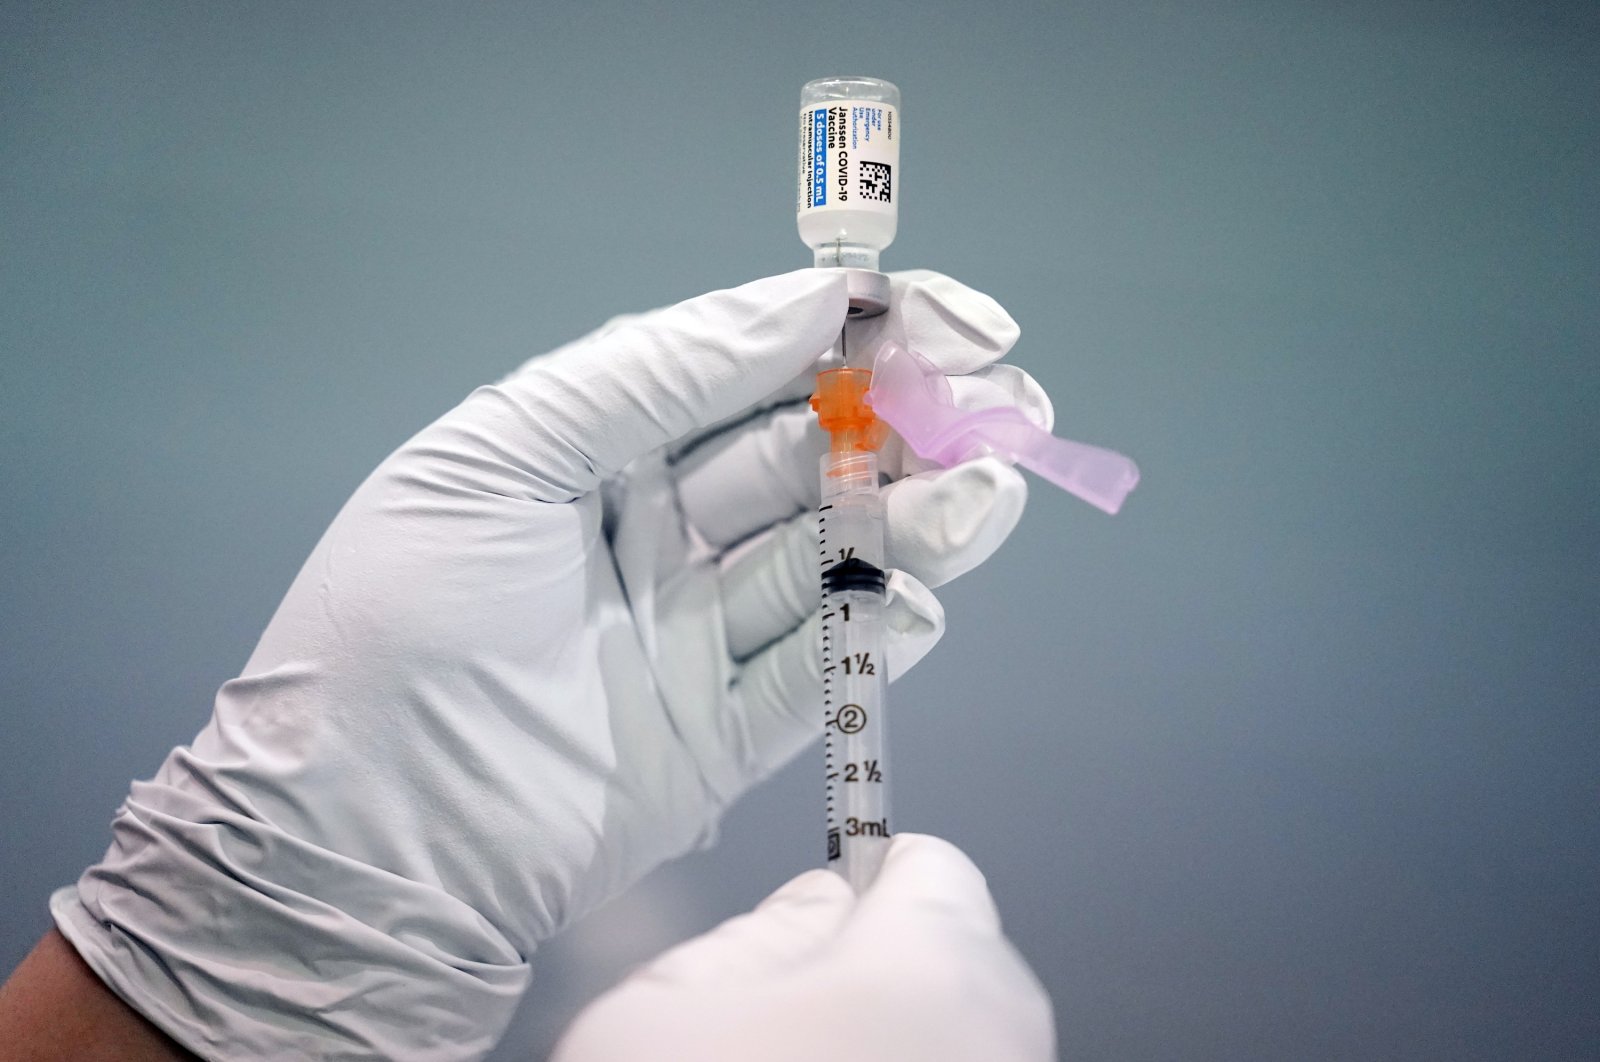 A member of the Philadelphia Fire Department prepares a dose of the Johnson & Johnson COVID-19 vaccine at a vaccination site setup in Philadelphia, U.S., March 26, 2021. (AP Photo)